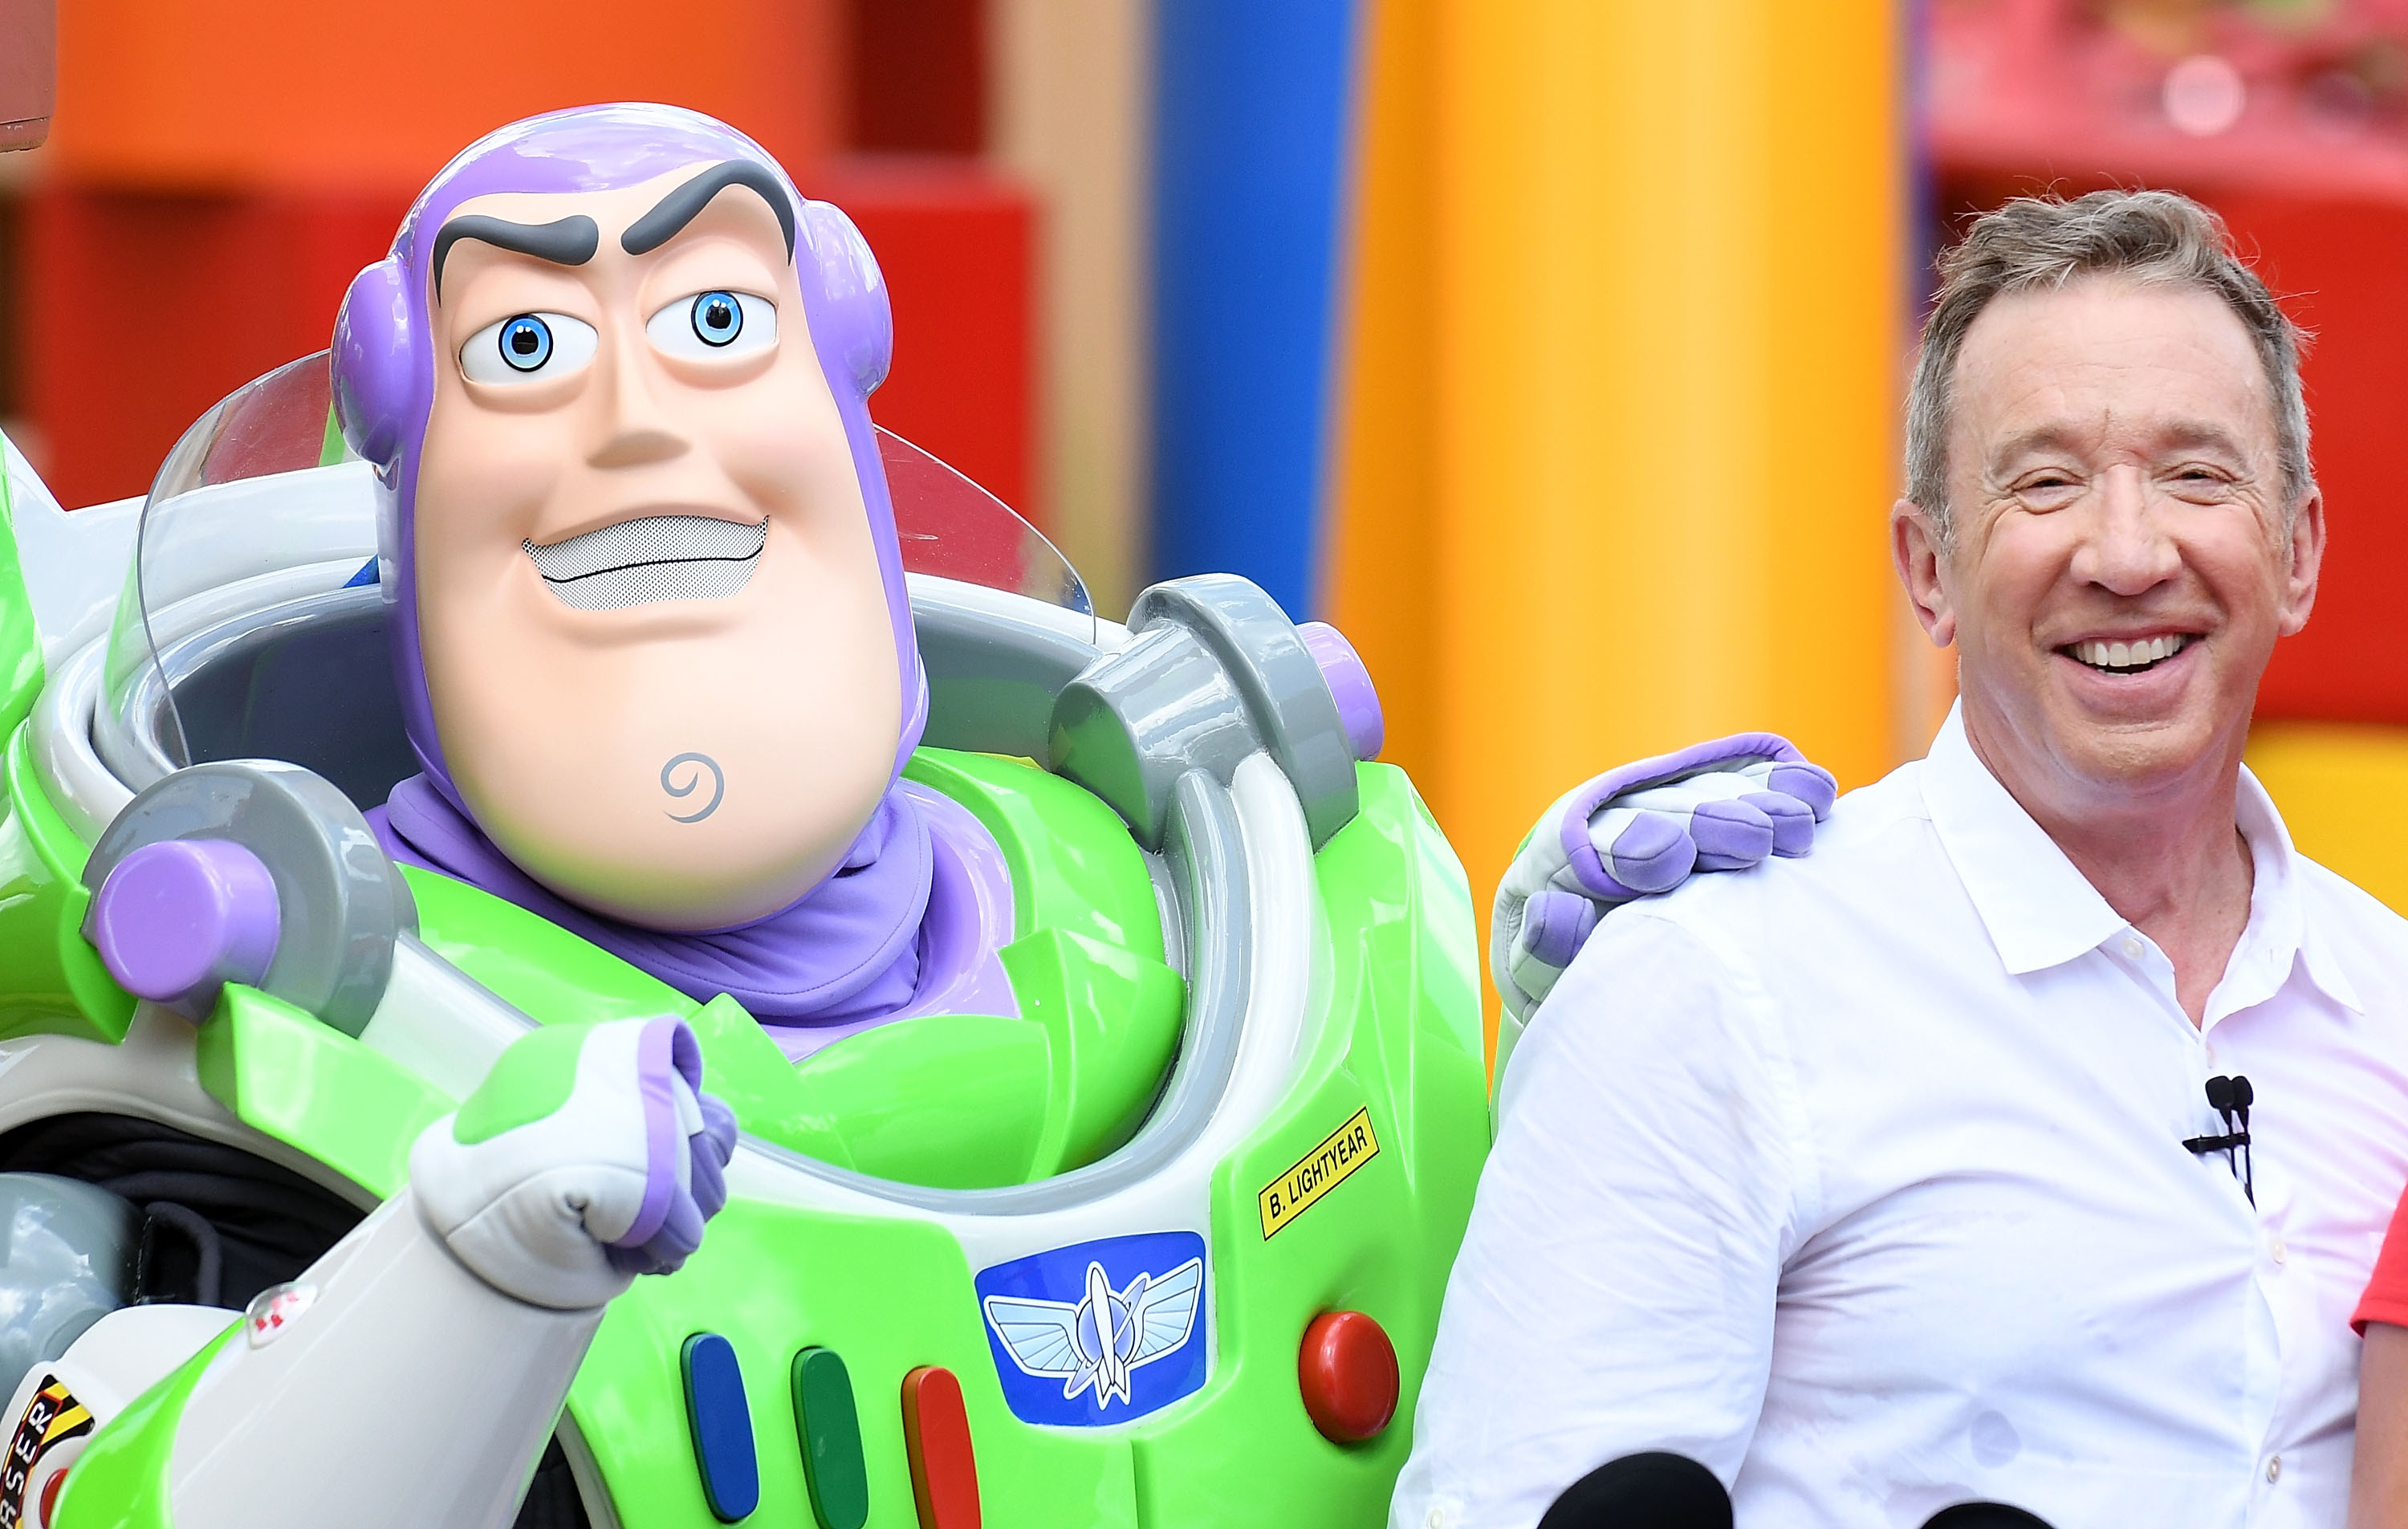 Toy Story actor Tim Allen poses with Buzz Lightyear at Toy Story Land at Disney's Hollywood Studios in Florida